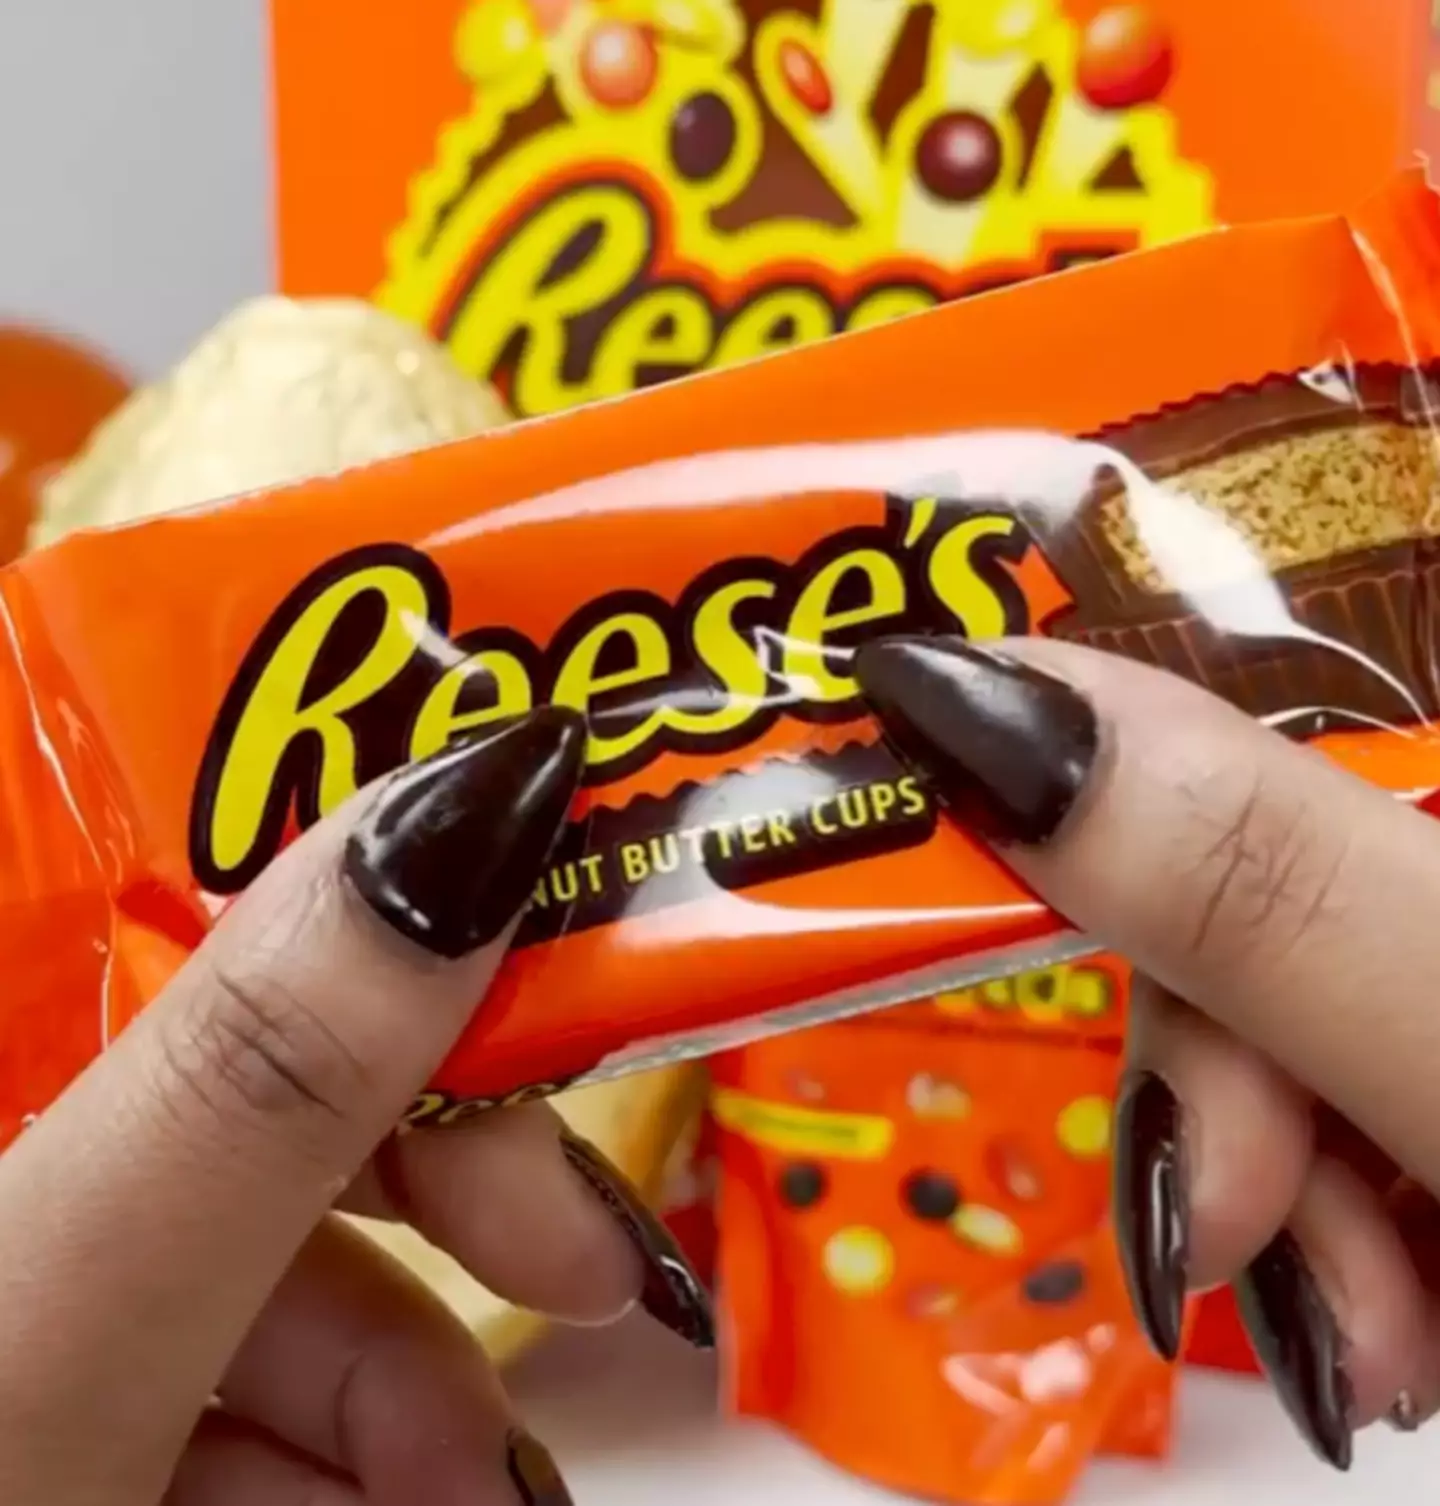 Reese's Peanut Butter Cup - made up of a smooth peanut butter filling enveloped in Hershey's chocolate - has been known and loved worldwide for a number of years.